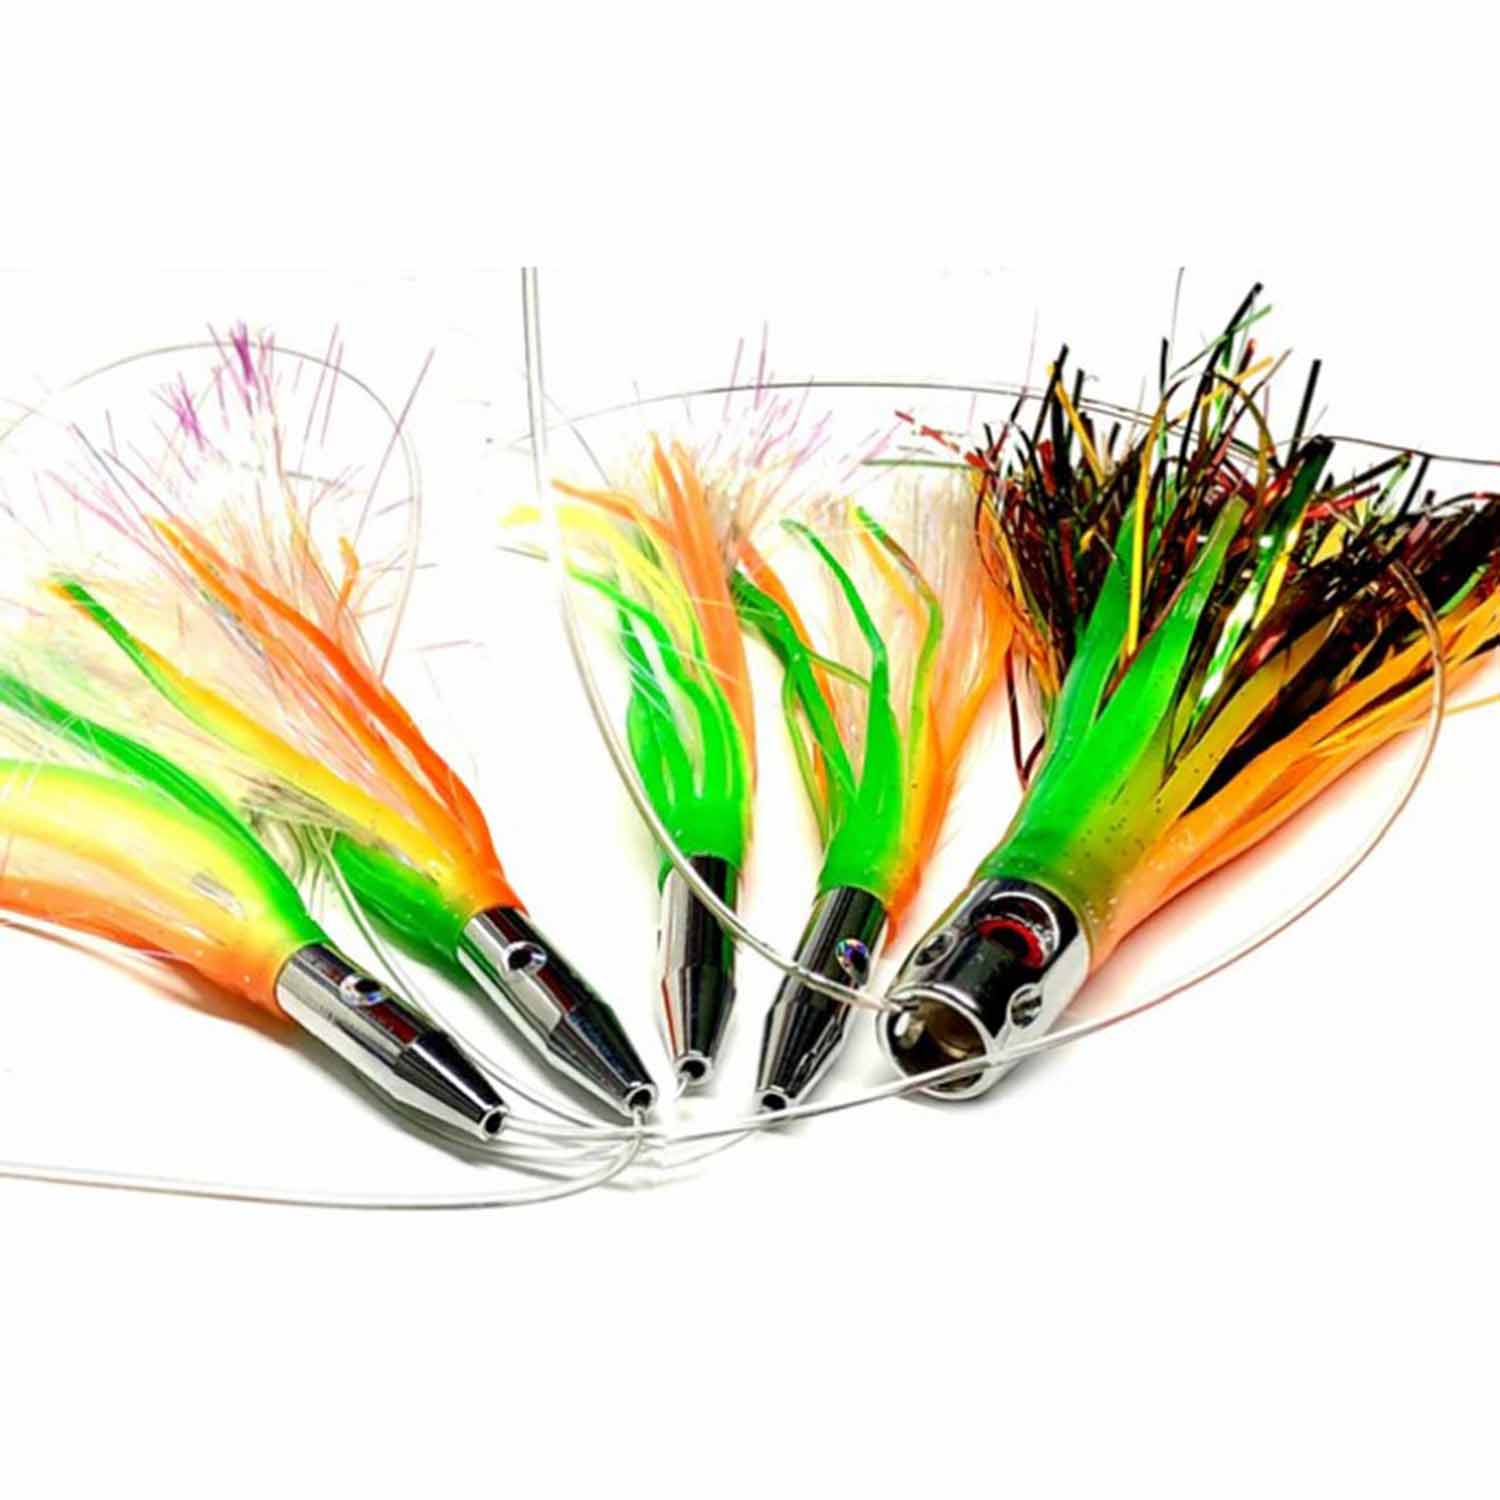 Tormenter Fishing Products - Get Serious - Get Tormenter - Snapper  Fishing Lures